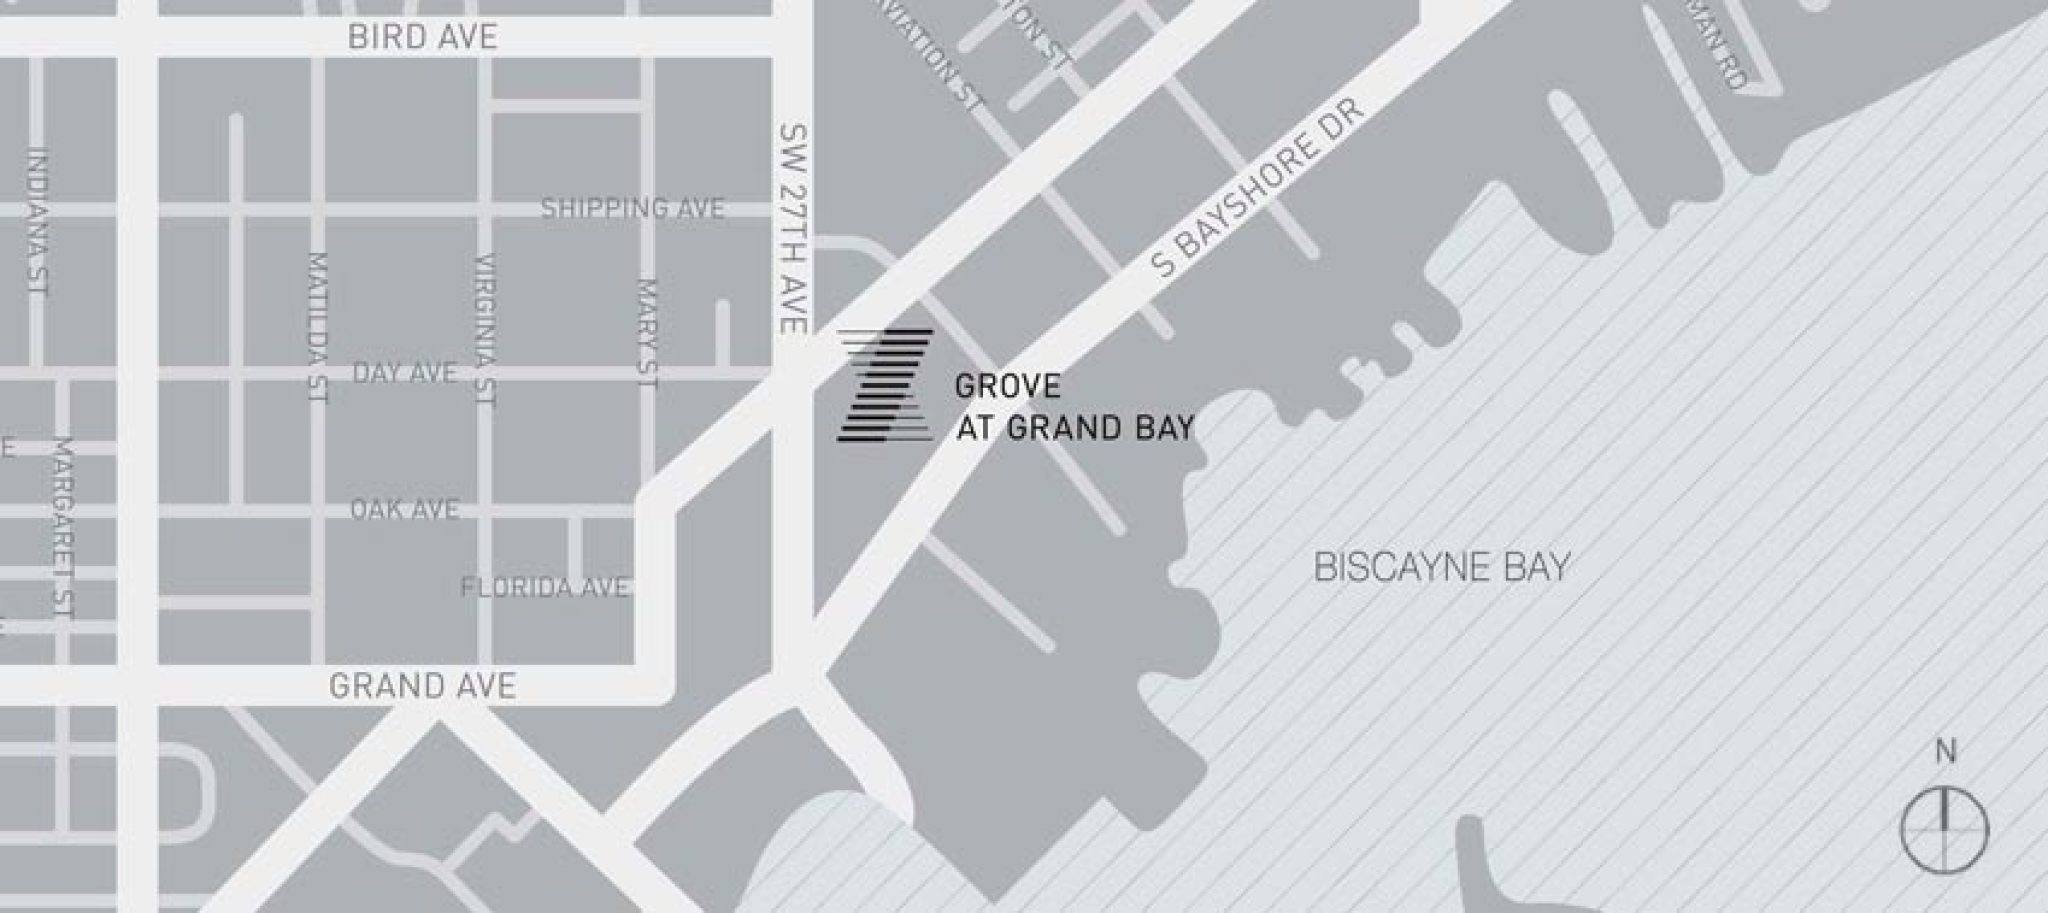 Siteplan for Grove at Grand Bay, Luxury Waterfront Condominiums at 2669 South Bayshore Drive, Miami, Florida 33133